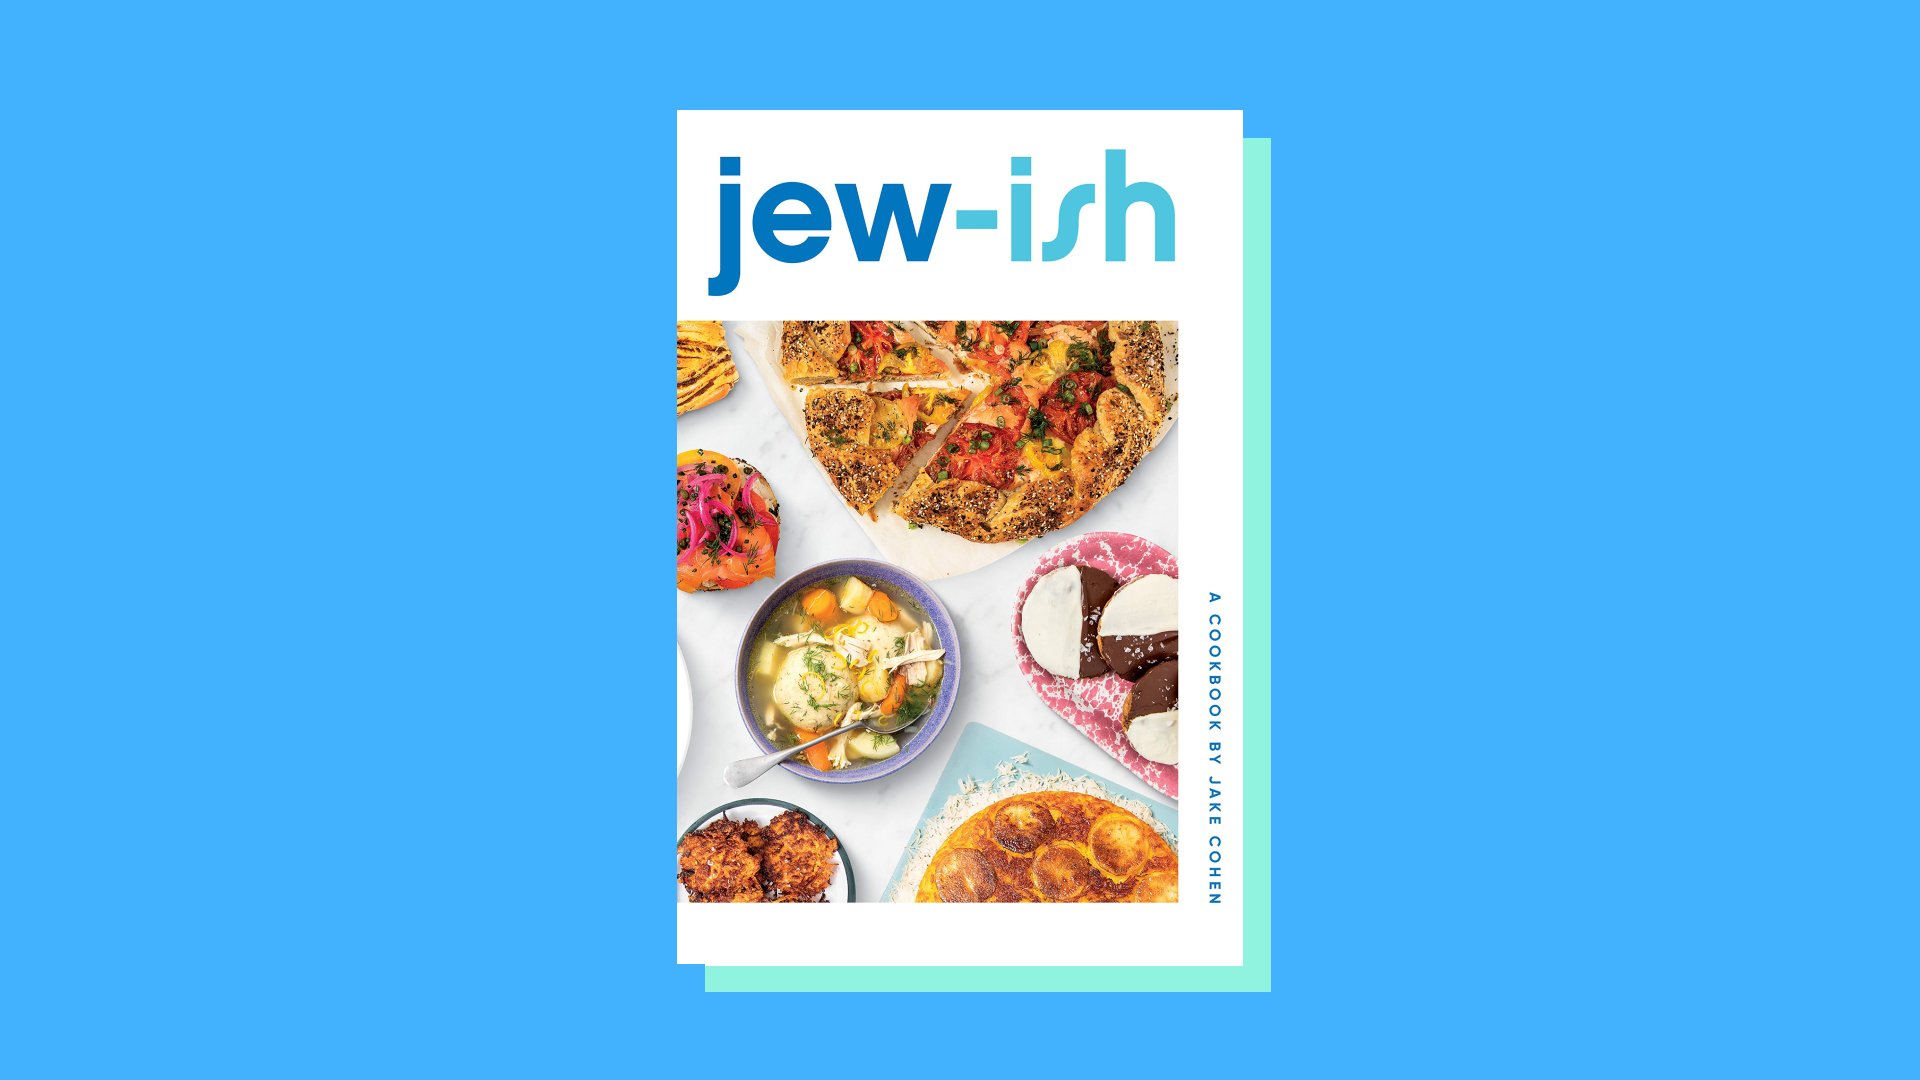 “Jew-ish: Reinvented Recipes from a Modern Mensch” by Jake Cohen